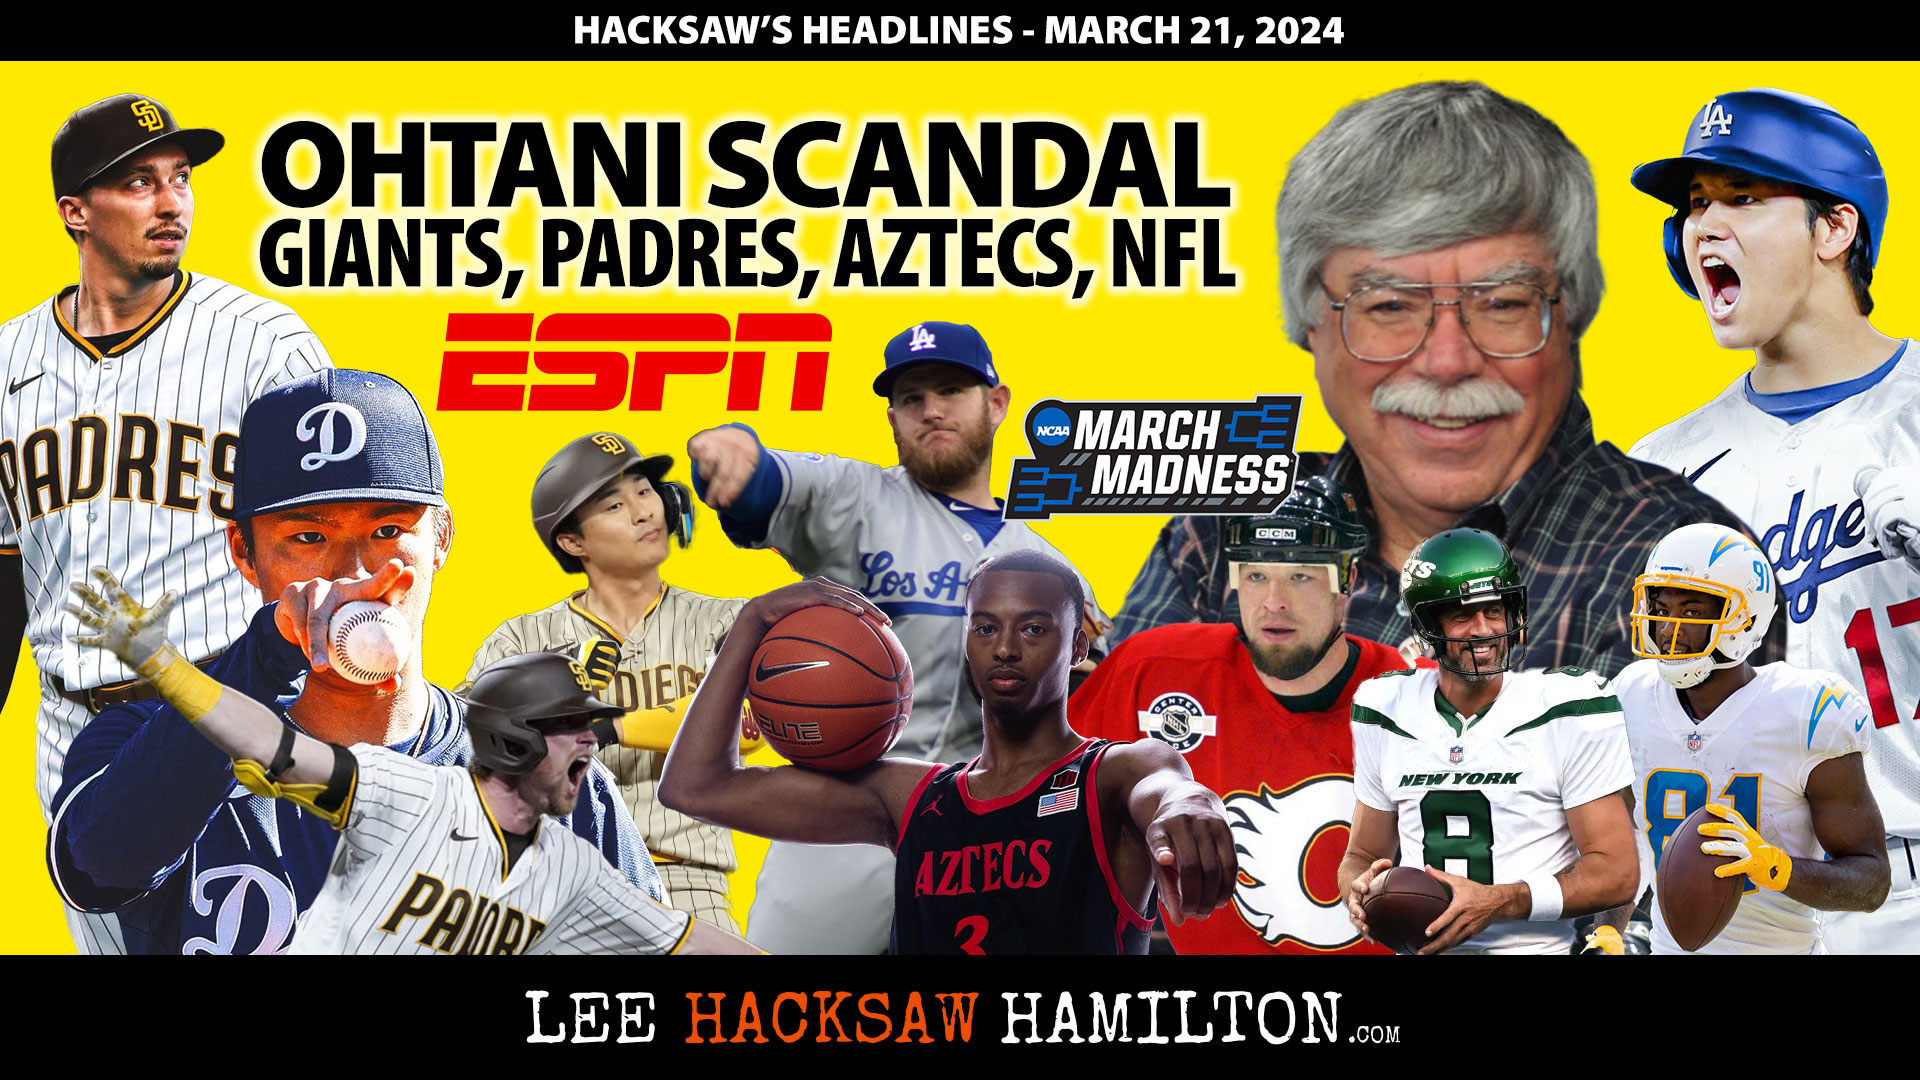 Lee Hacksaw Hamilton discusses Shohei Ohtani Money Scandal, Snell, Padres, March Madness, Aztecs, NFL Free Agency, NHL